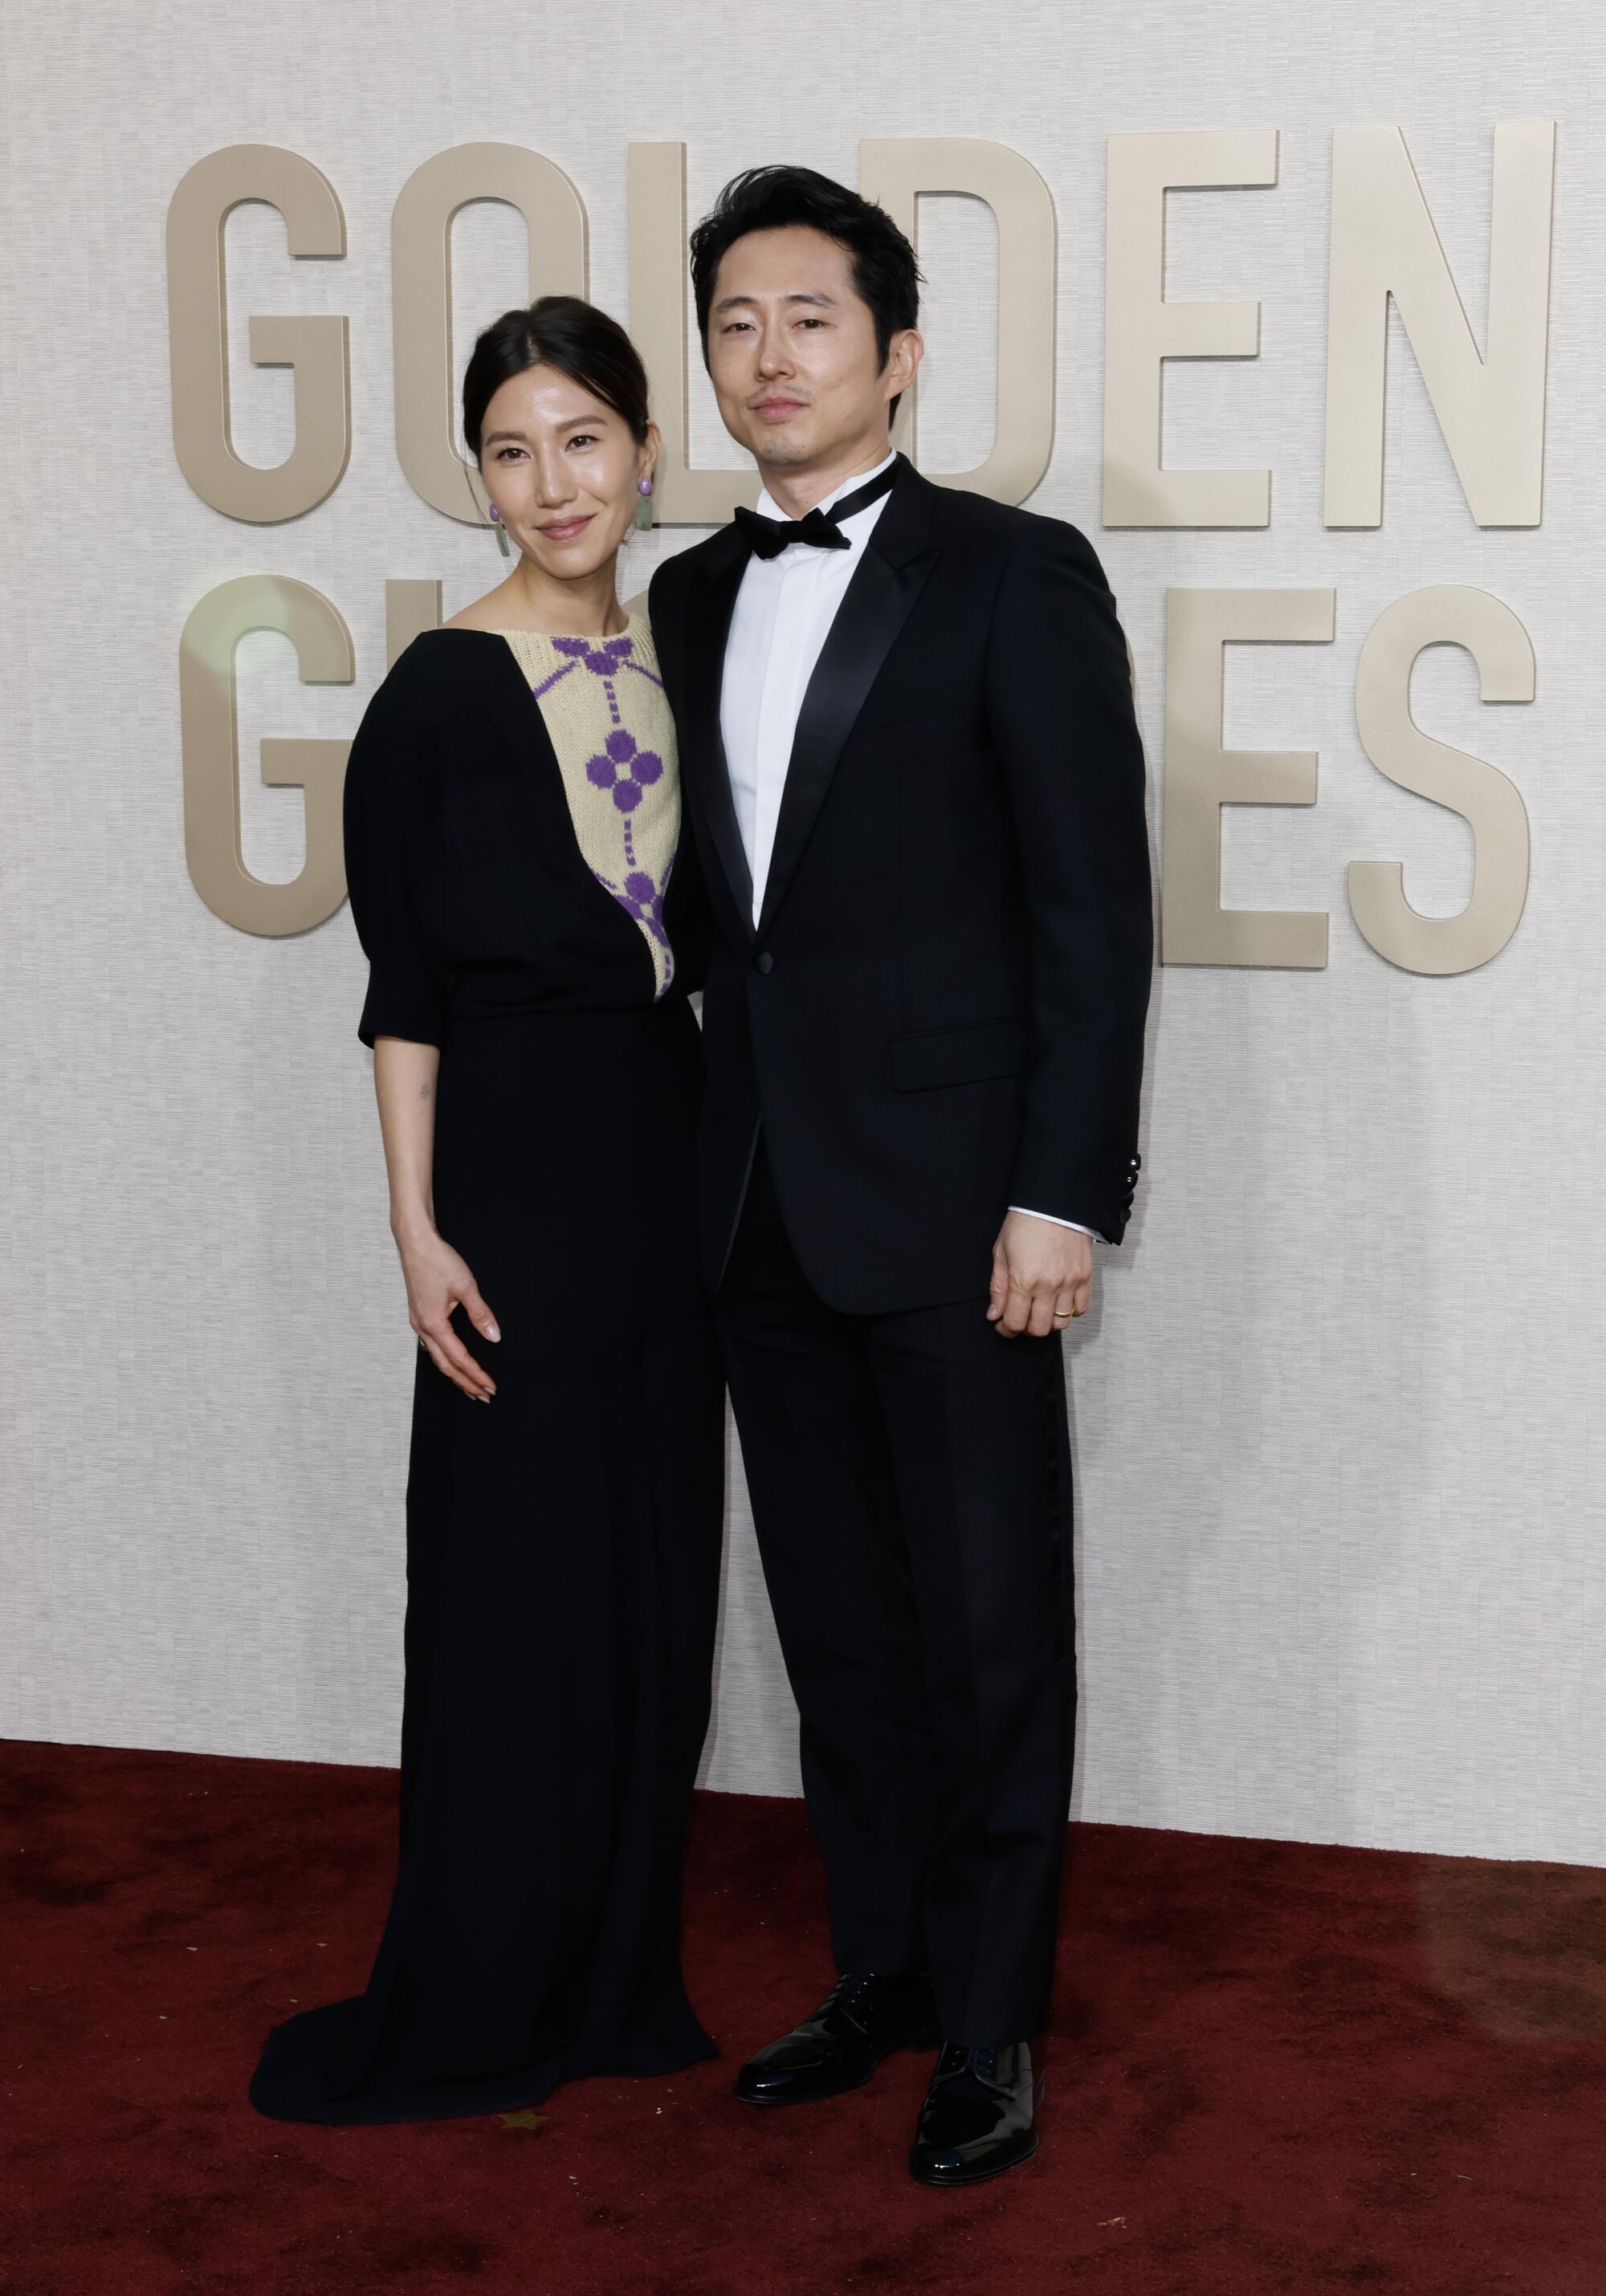 Joana Pak and Steven Yeun on the red carpet of the 81st Golden Globe Awards at the Beverly Hilton 